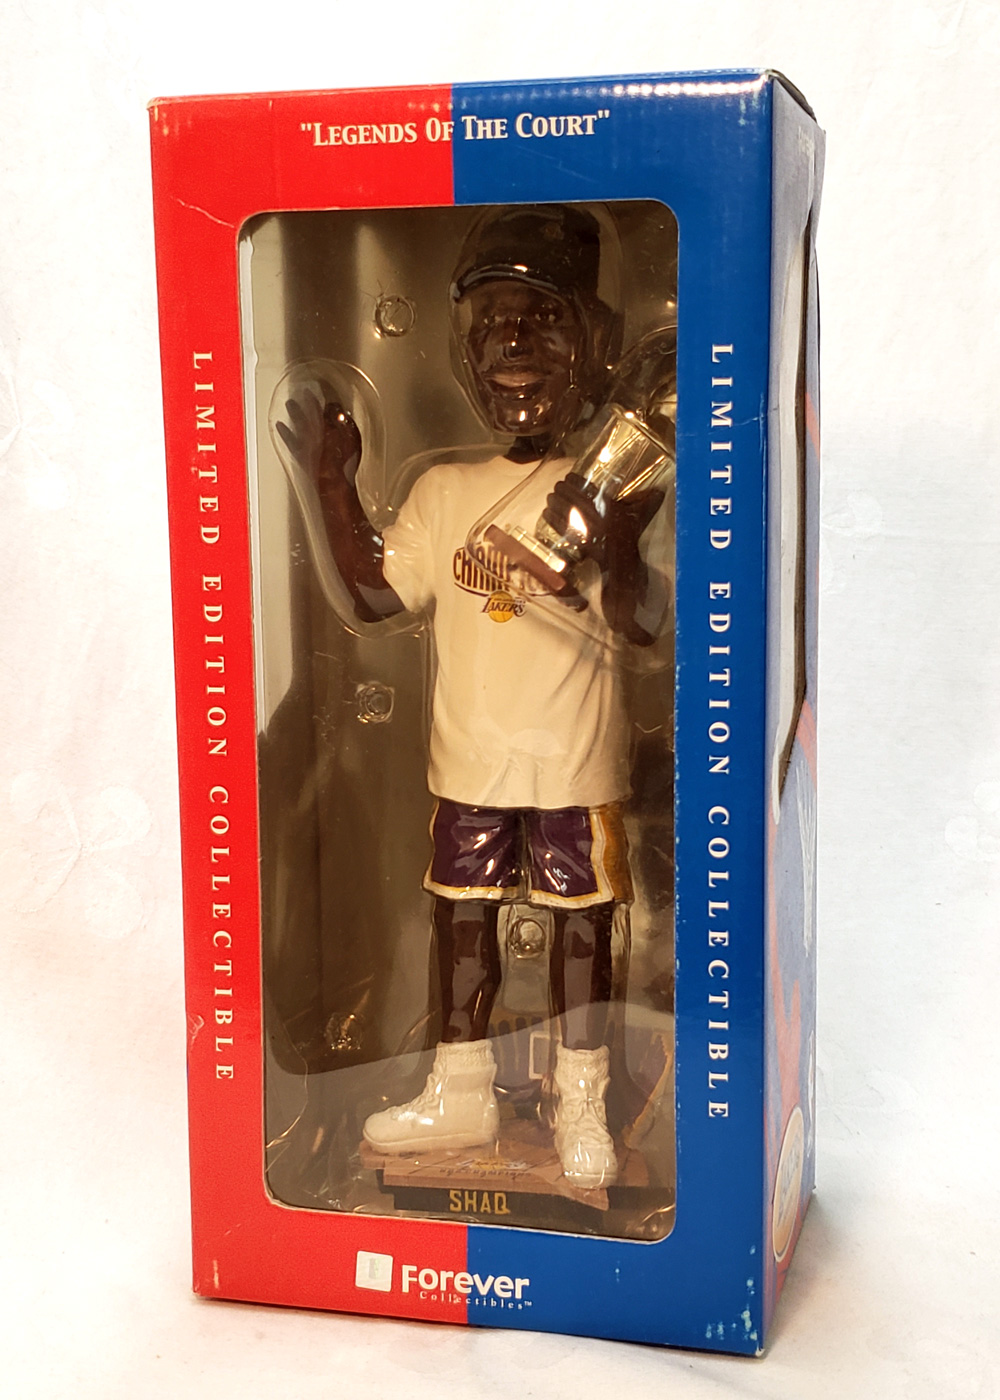 Shaq Face Gifts & Merchandise for Sale